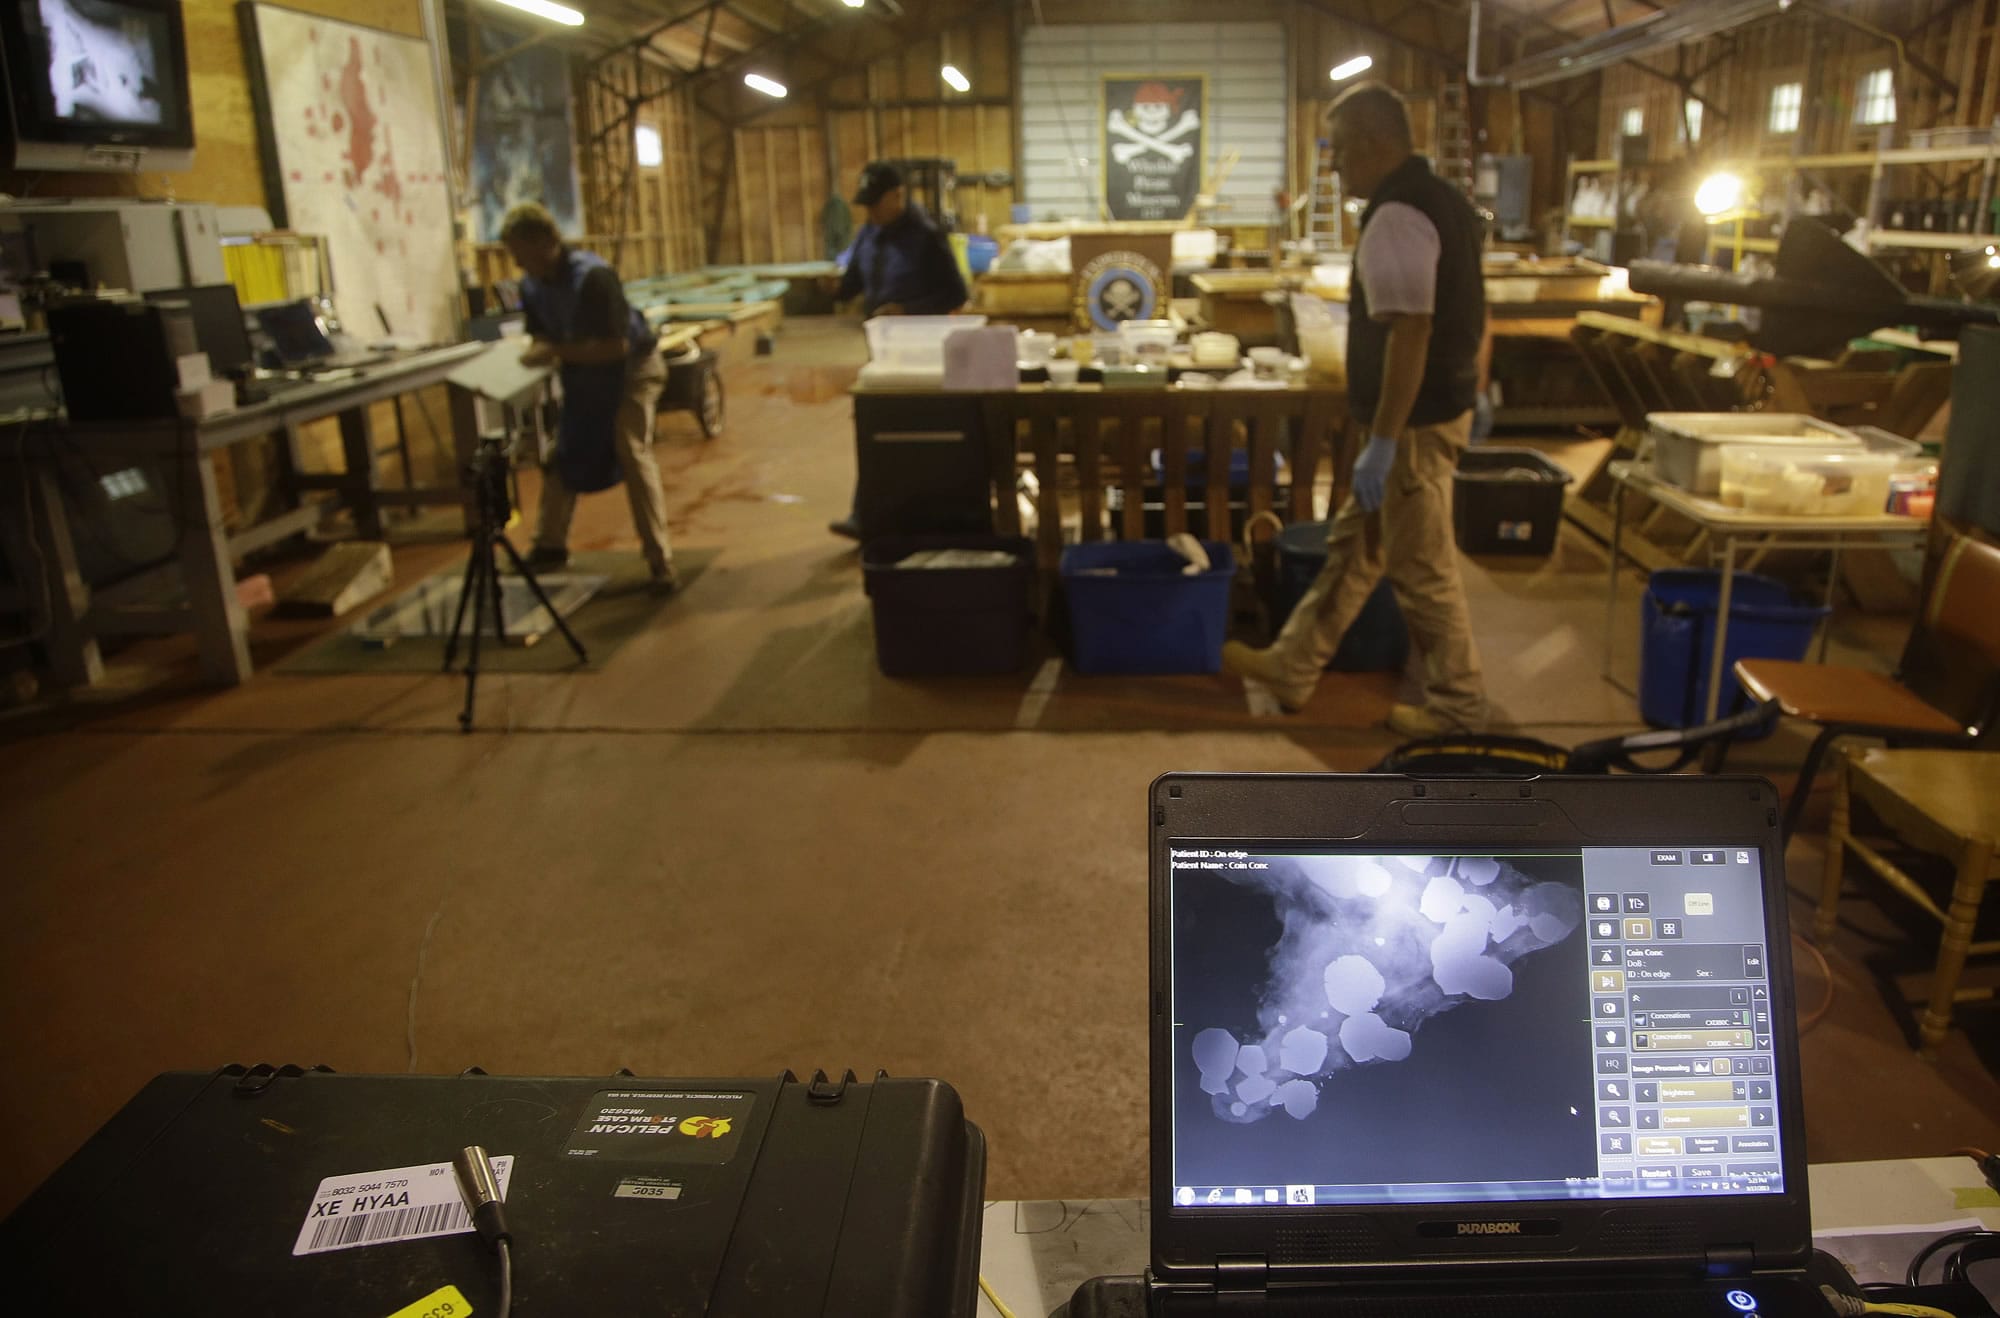 An X-ray of a concretion, front, a rocky mass that forms when metals such as gold and silver chemically react to salt water, is seen on a laptop computer at the Whydah pirate ship museum's warehouse in Brewster, Mass., on Tuesday.